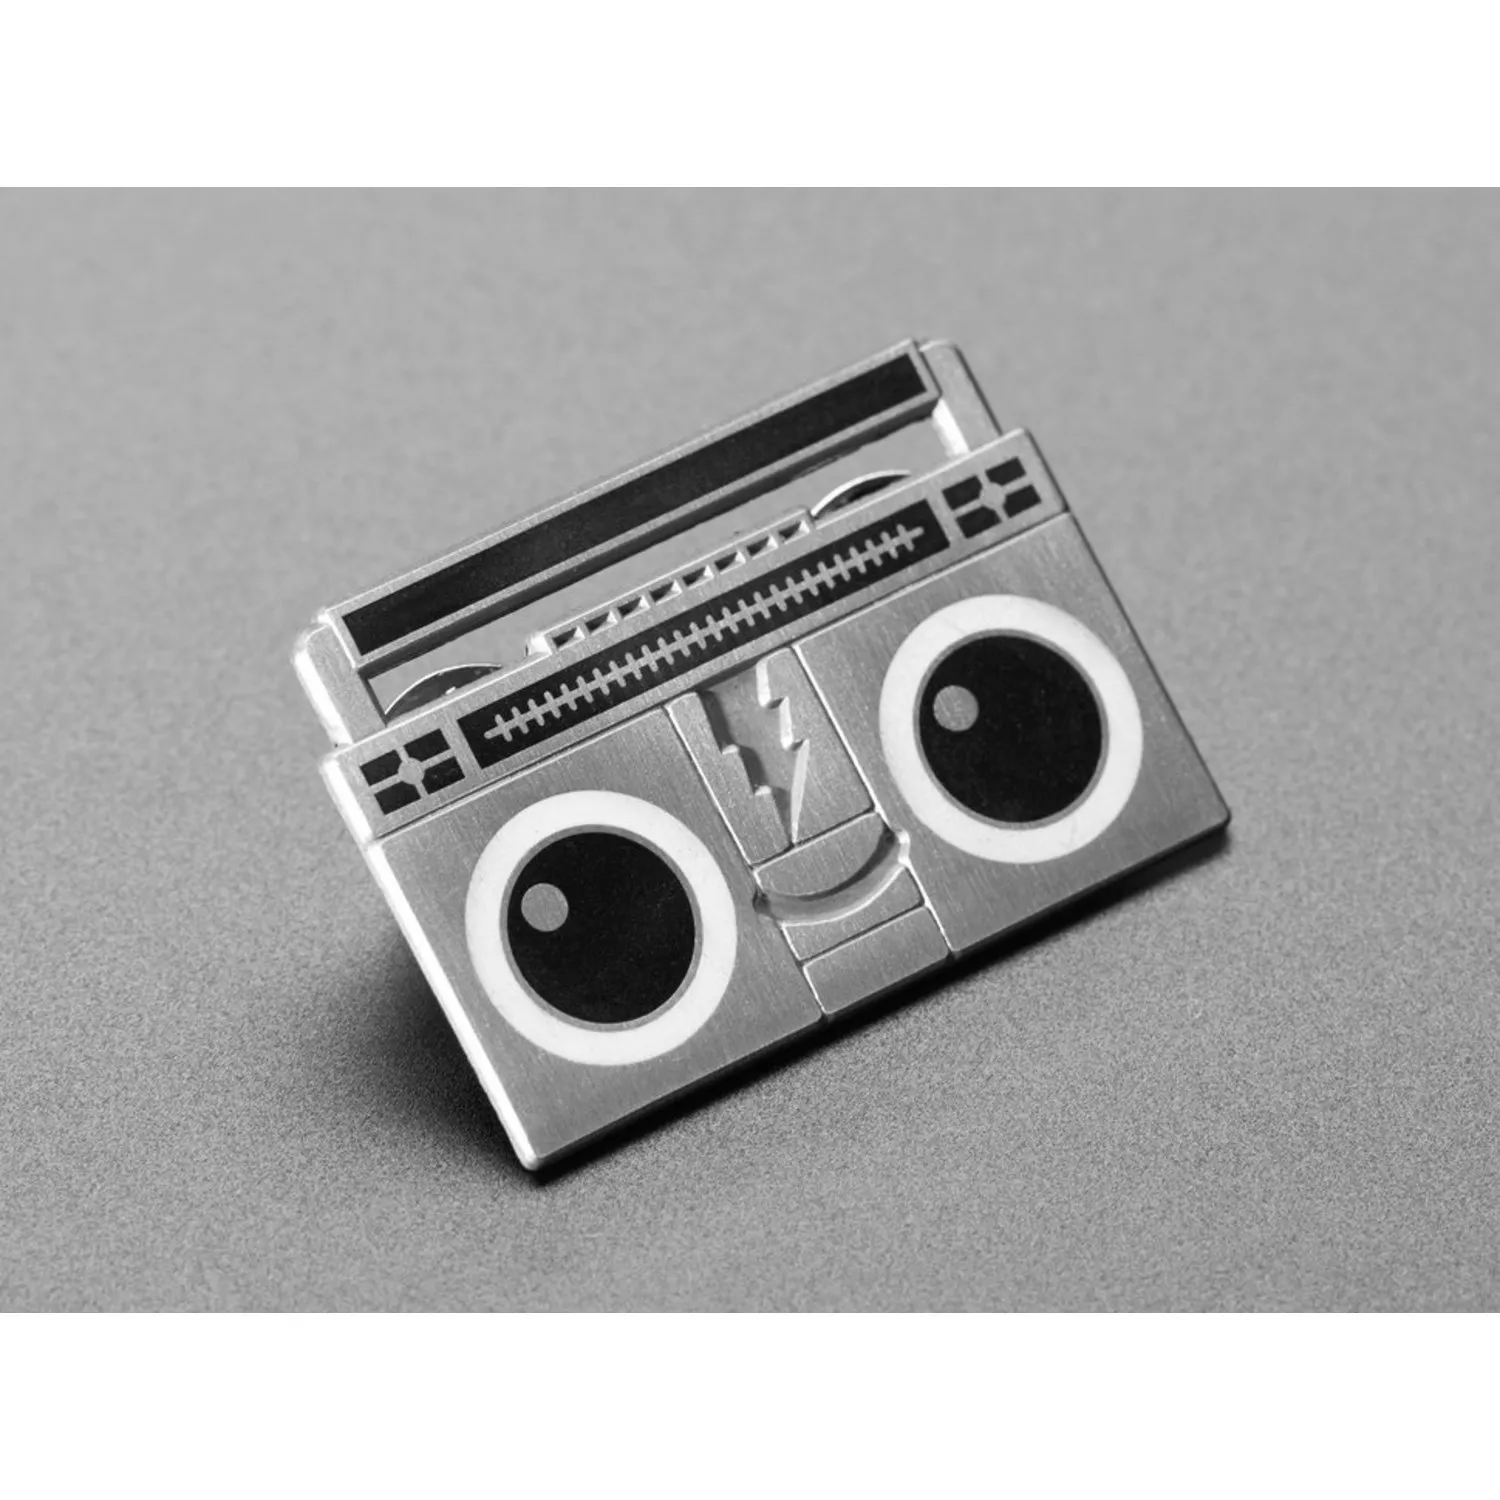 Photo of Boomy the BoomBox - Limited Edition Enamel Pin